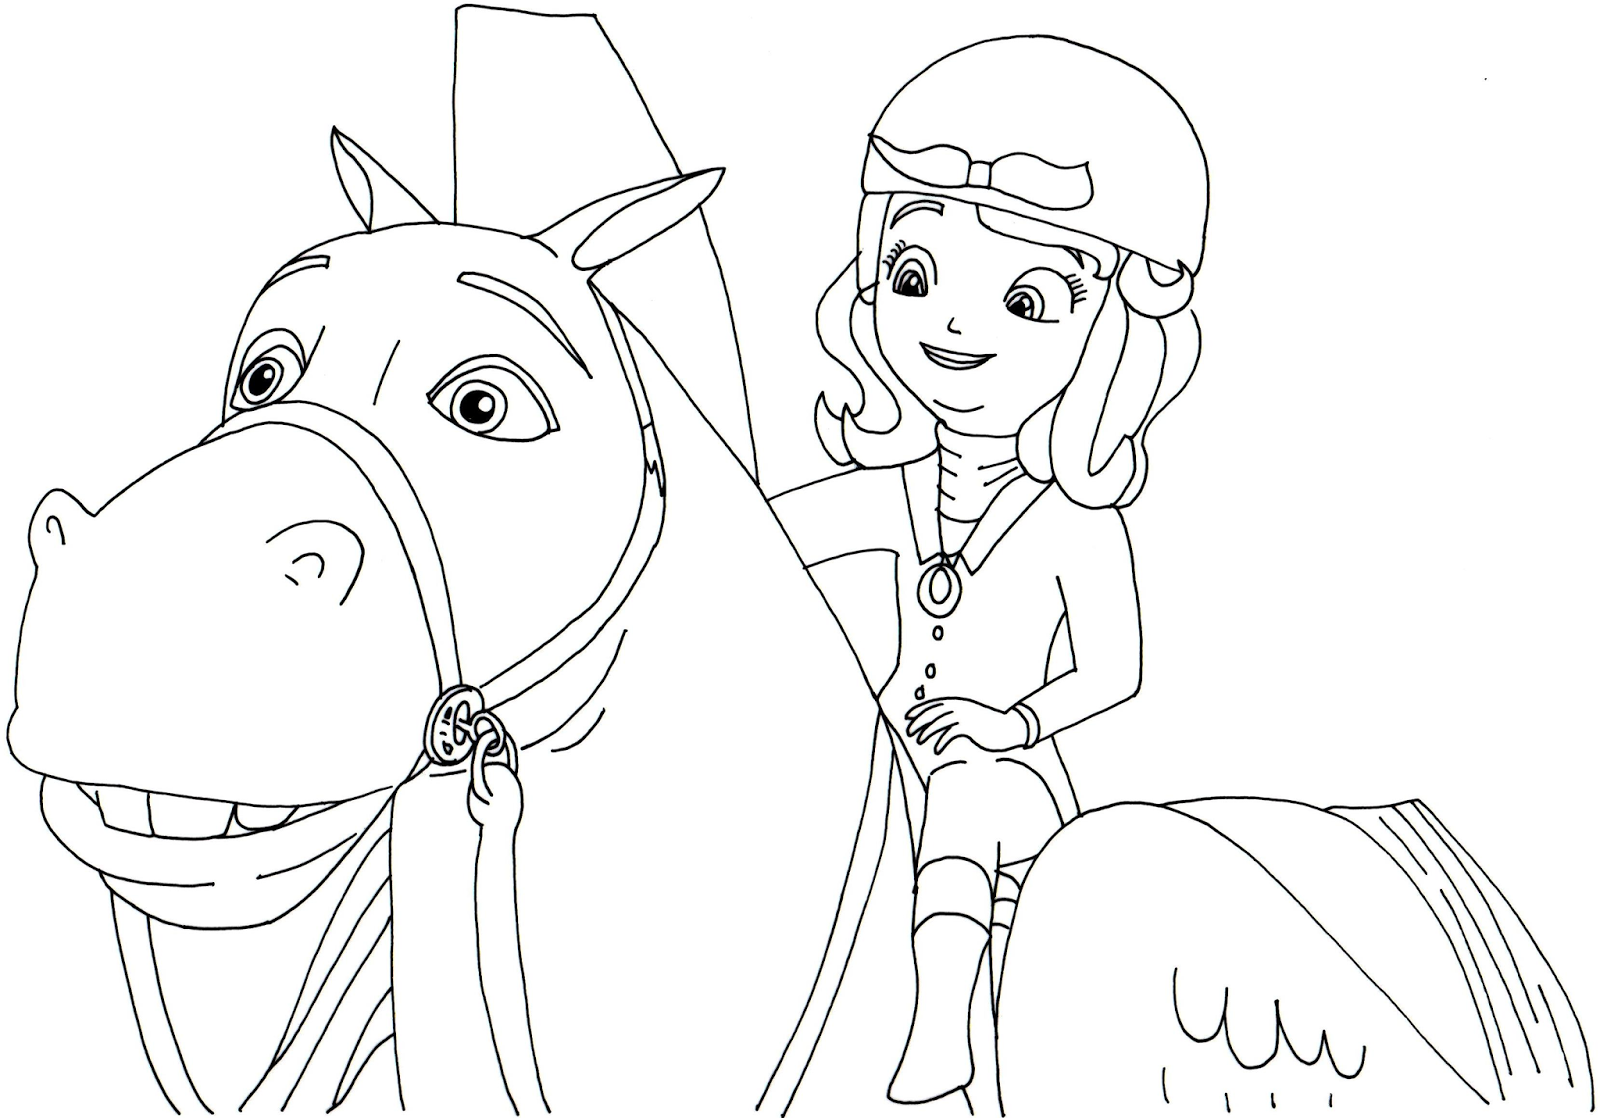 Sofia The First Coloring Pages: Minimus and Sofia the First ...